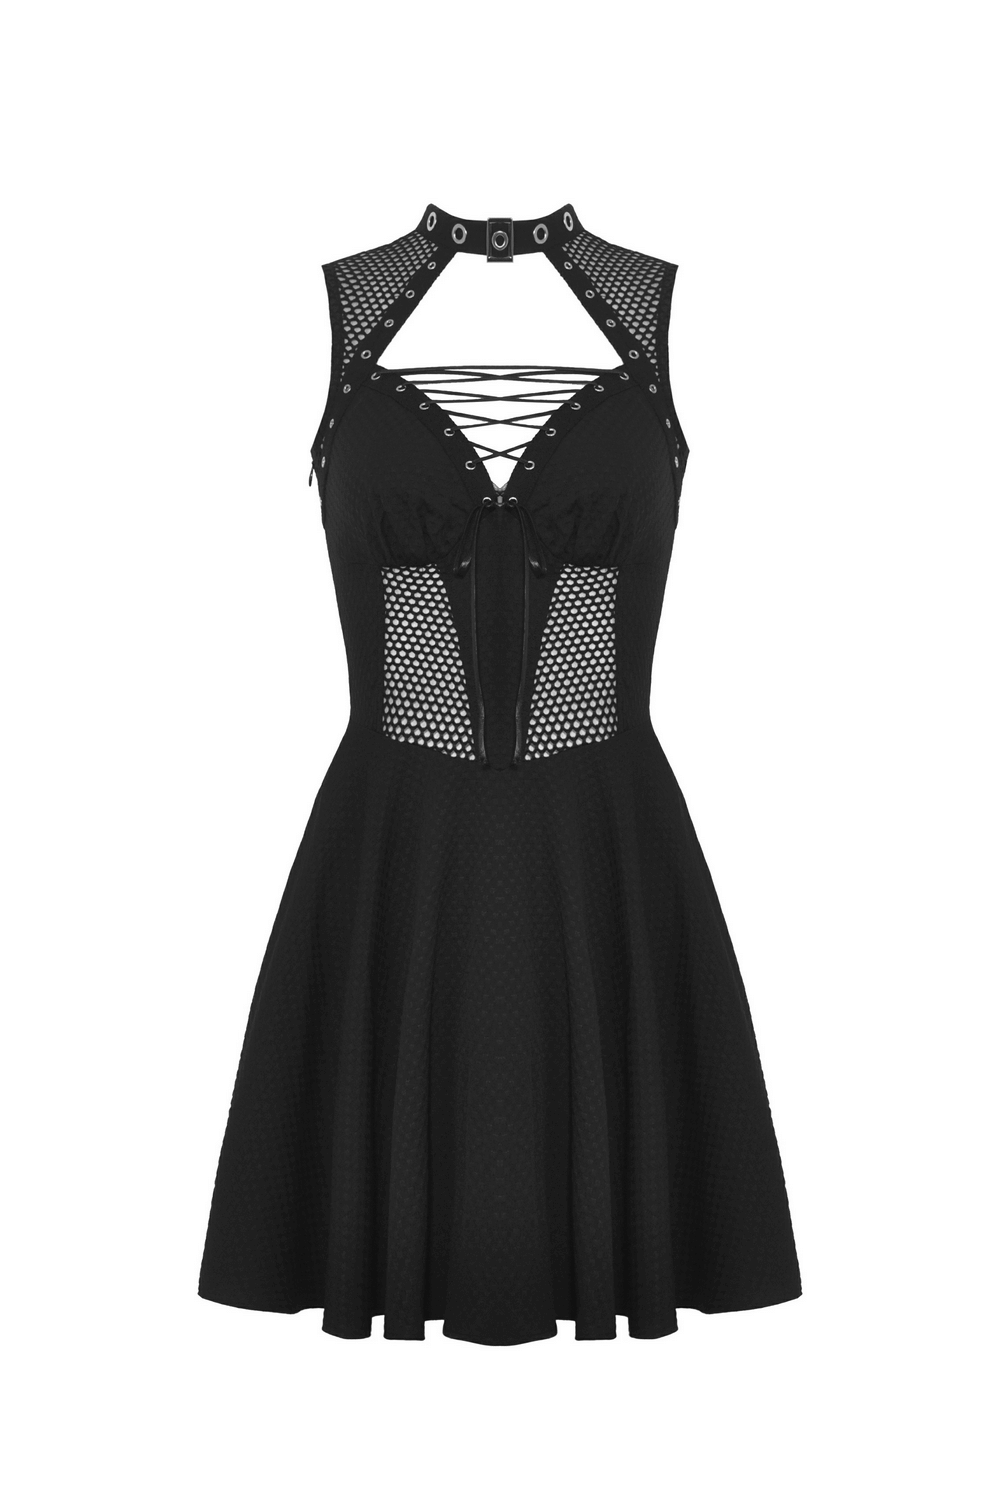 Gothic Black Dress with Fishnet Detail and Lace-Up Front